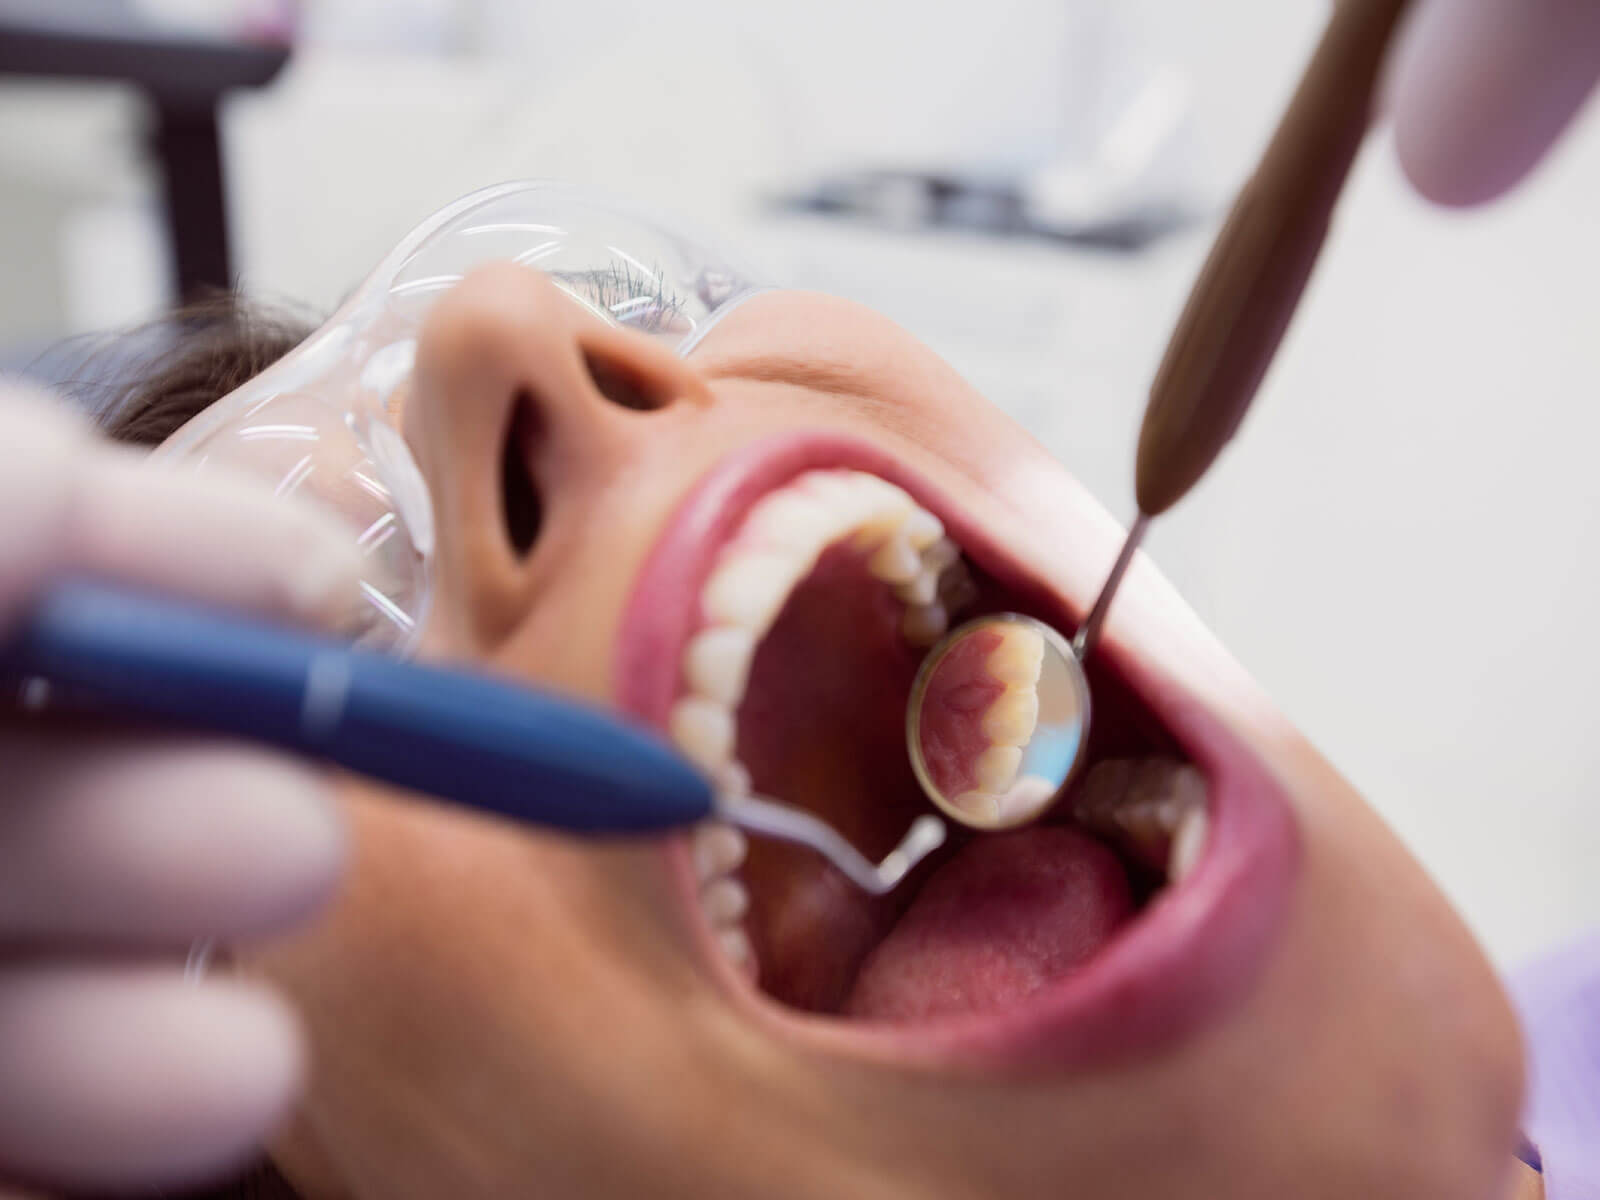 Why Get A Root Canal Instead of Only Taking Antibiotics